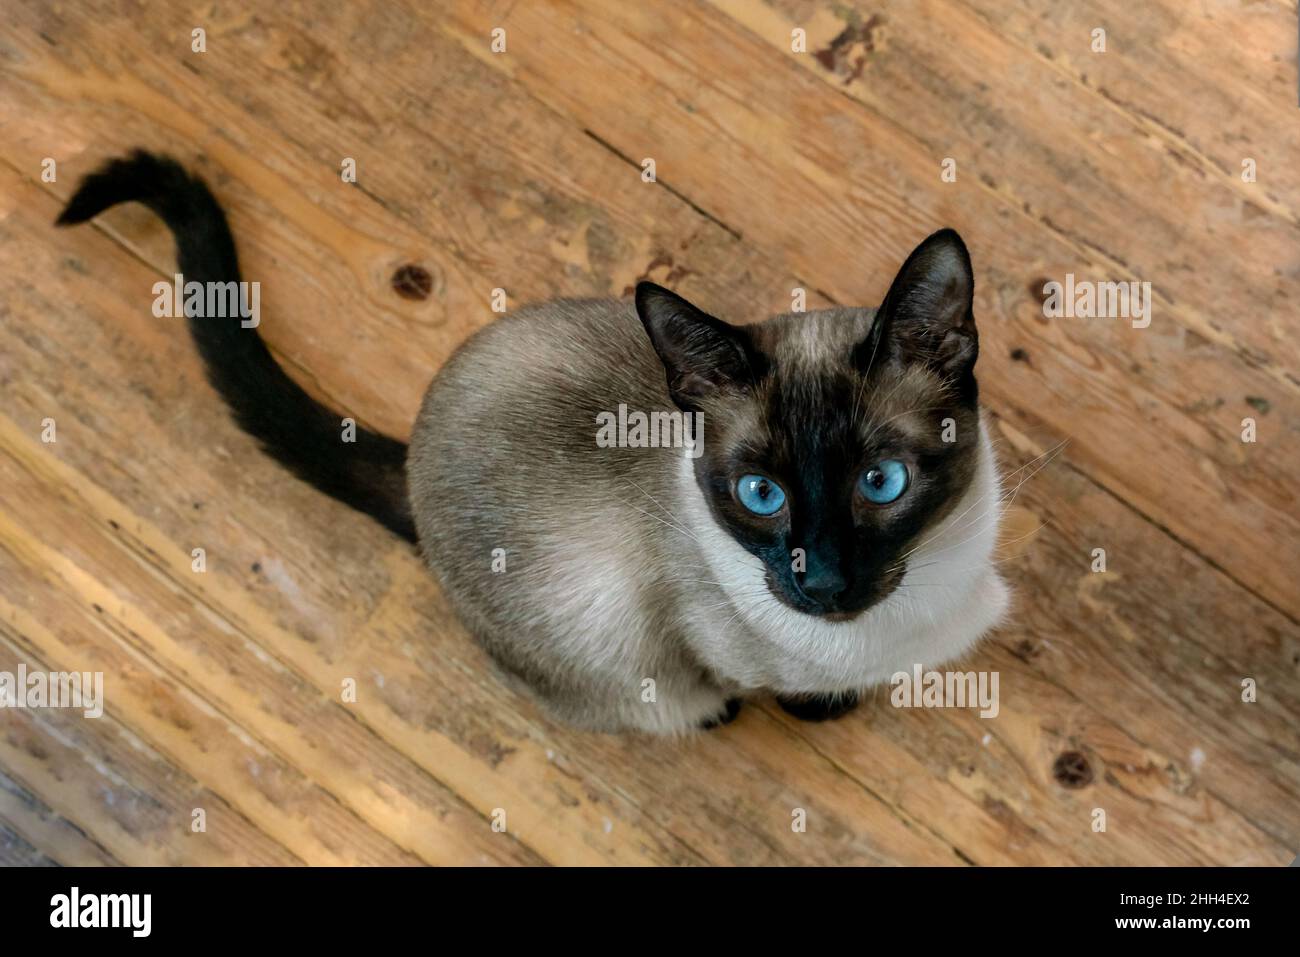 Close up portrait of Siamese cat with blue eyes looking upwards while sitting on wooden floor. High angle shot Stock Photo